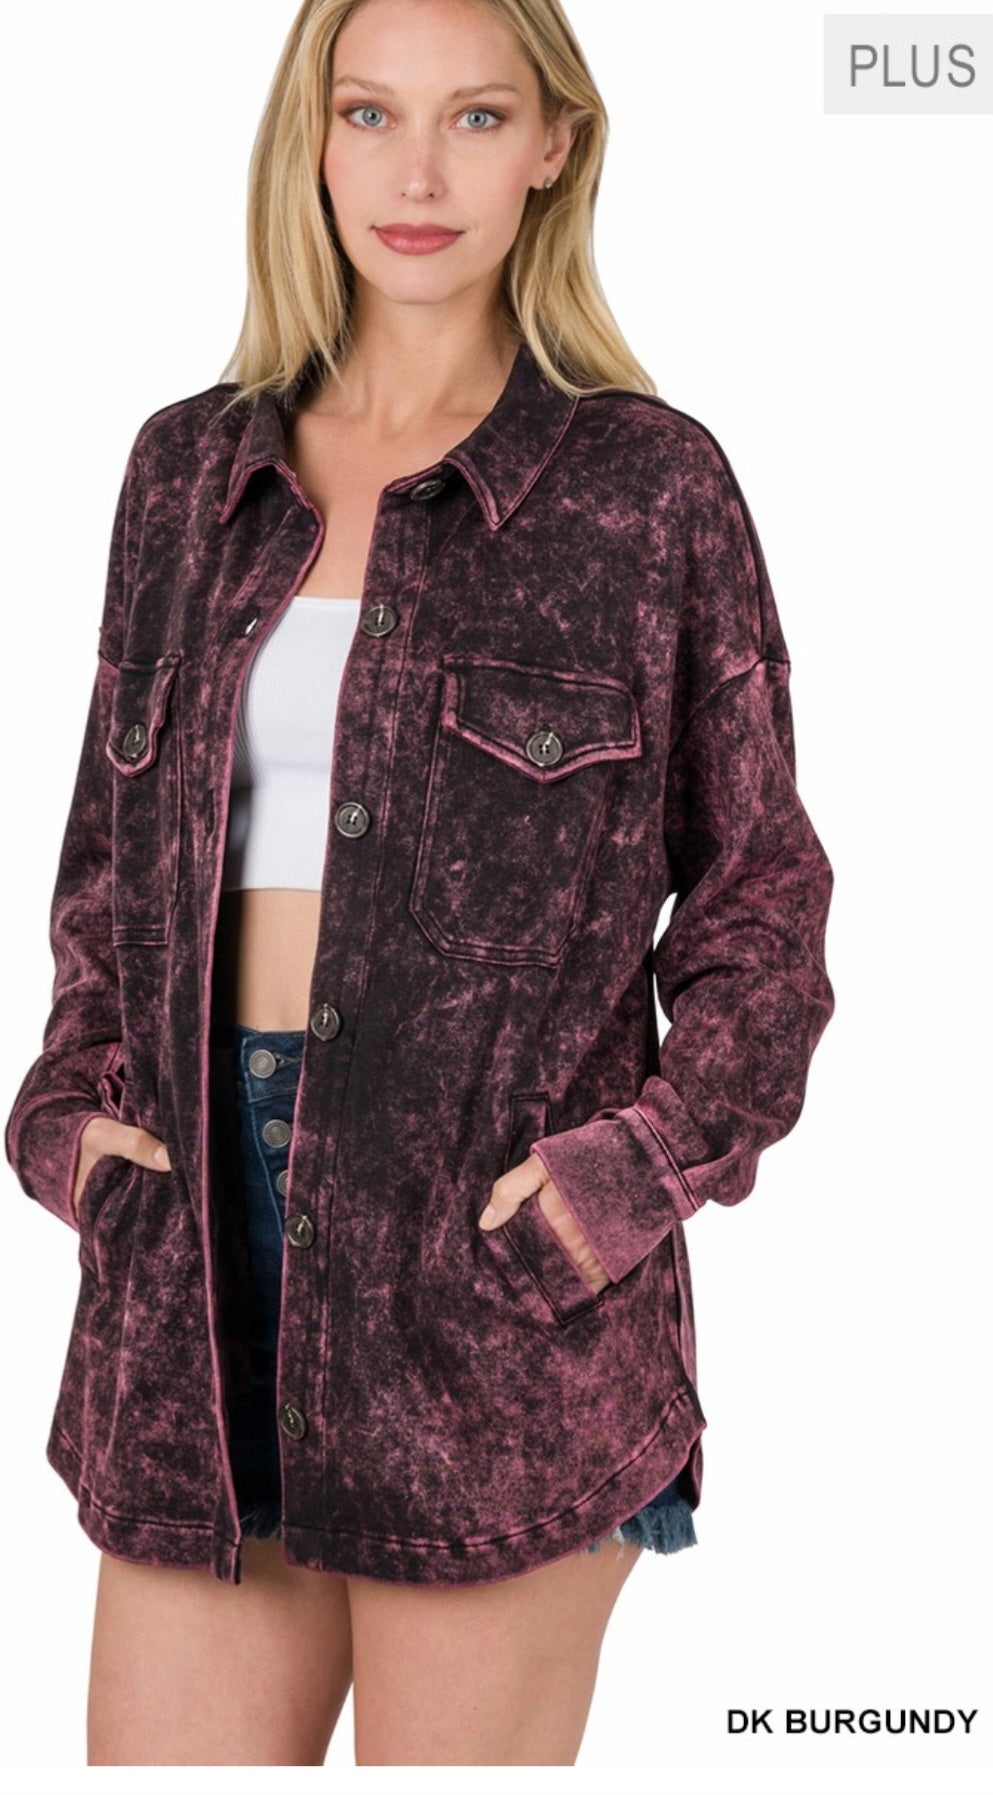 Mineral Washed Plus Size Shacket choice of colors